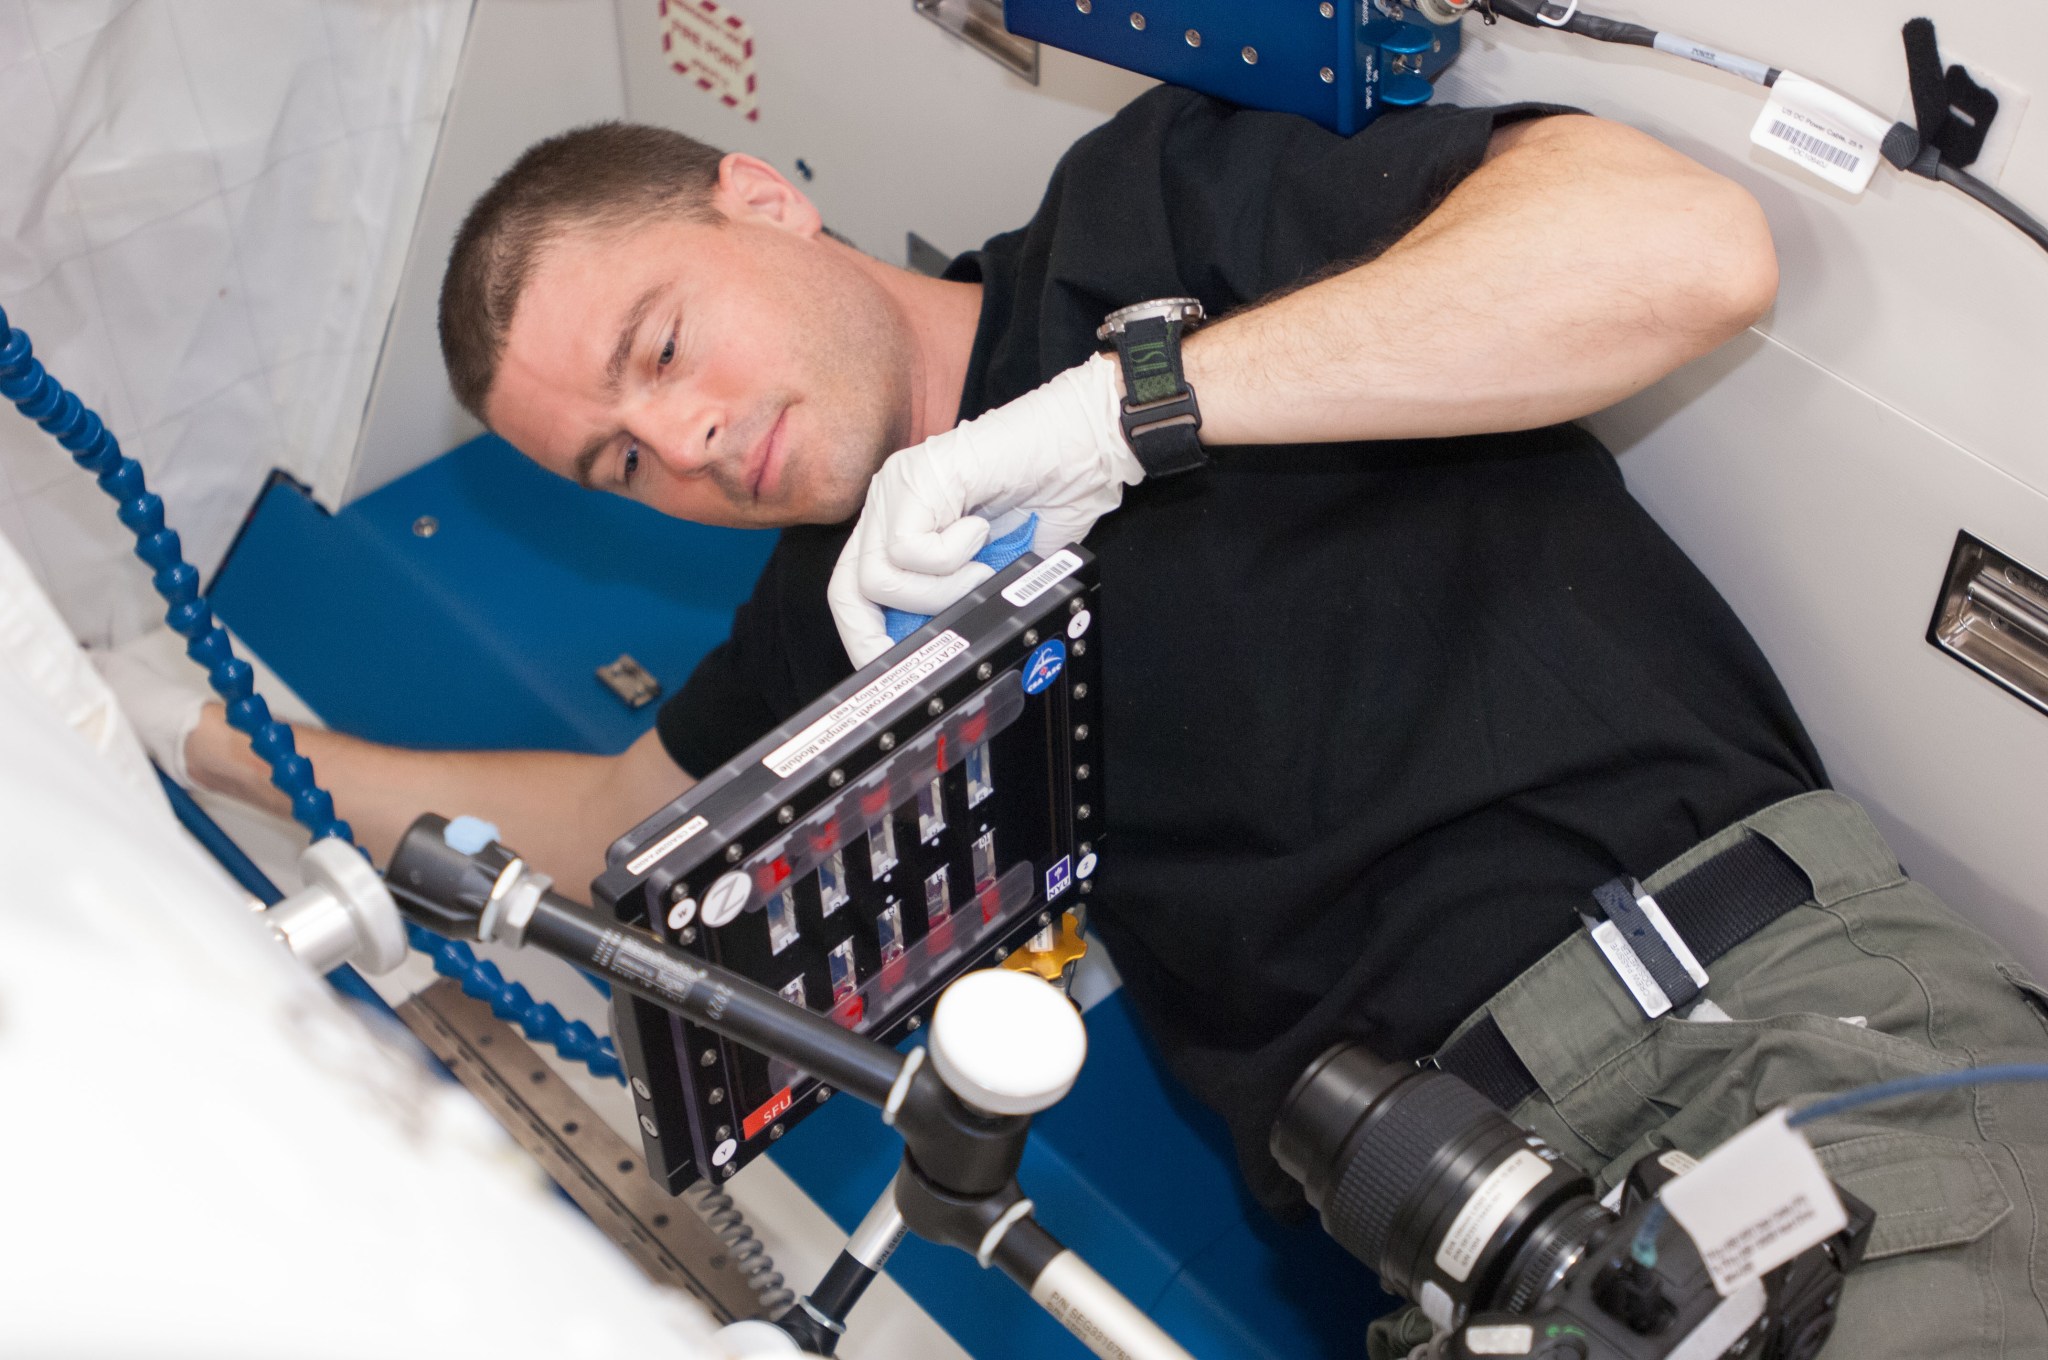 NASA astronaut Reid Wiseman conducts a session with the Binary Colloidal Alloy Test-C1 experiment.